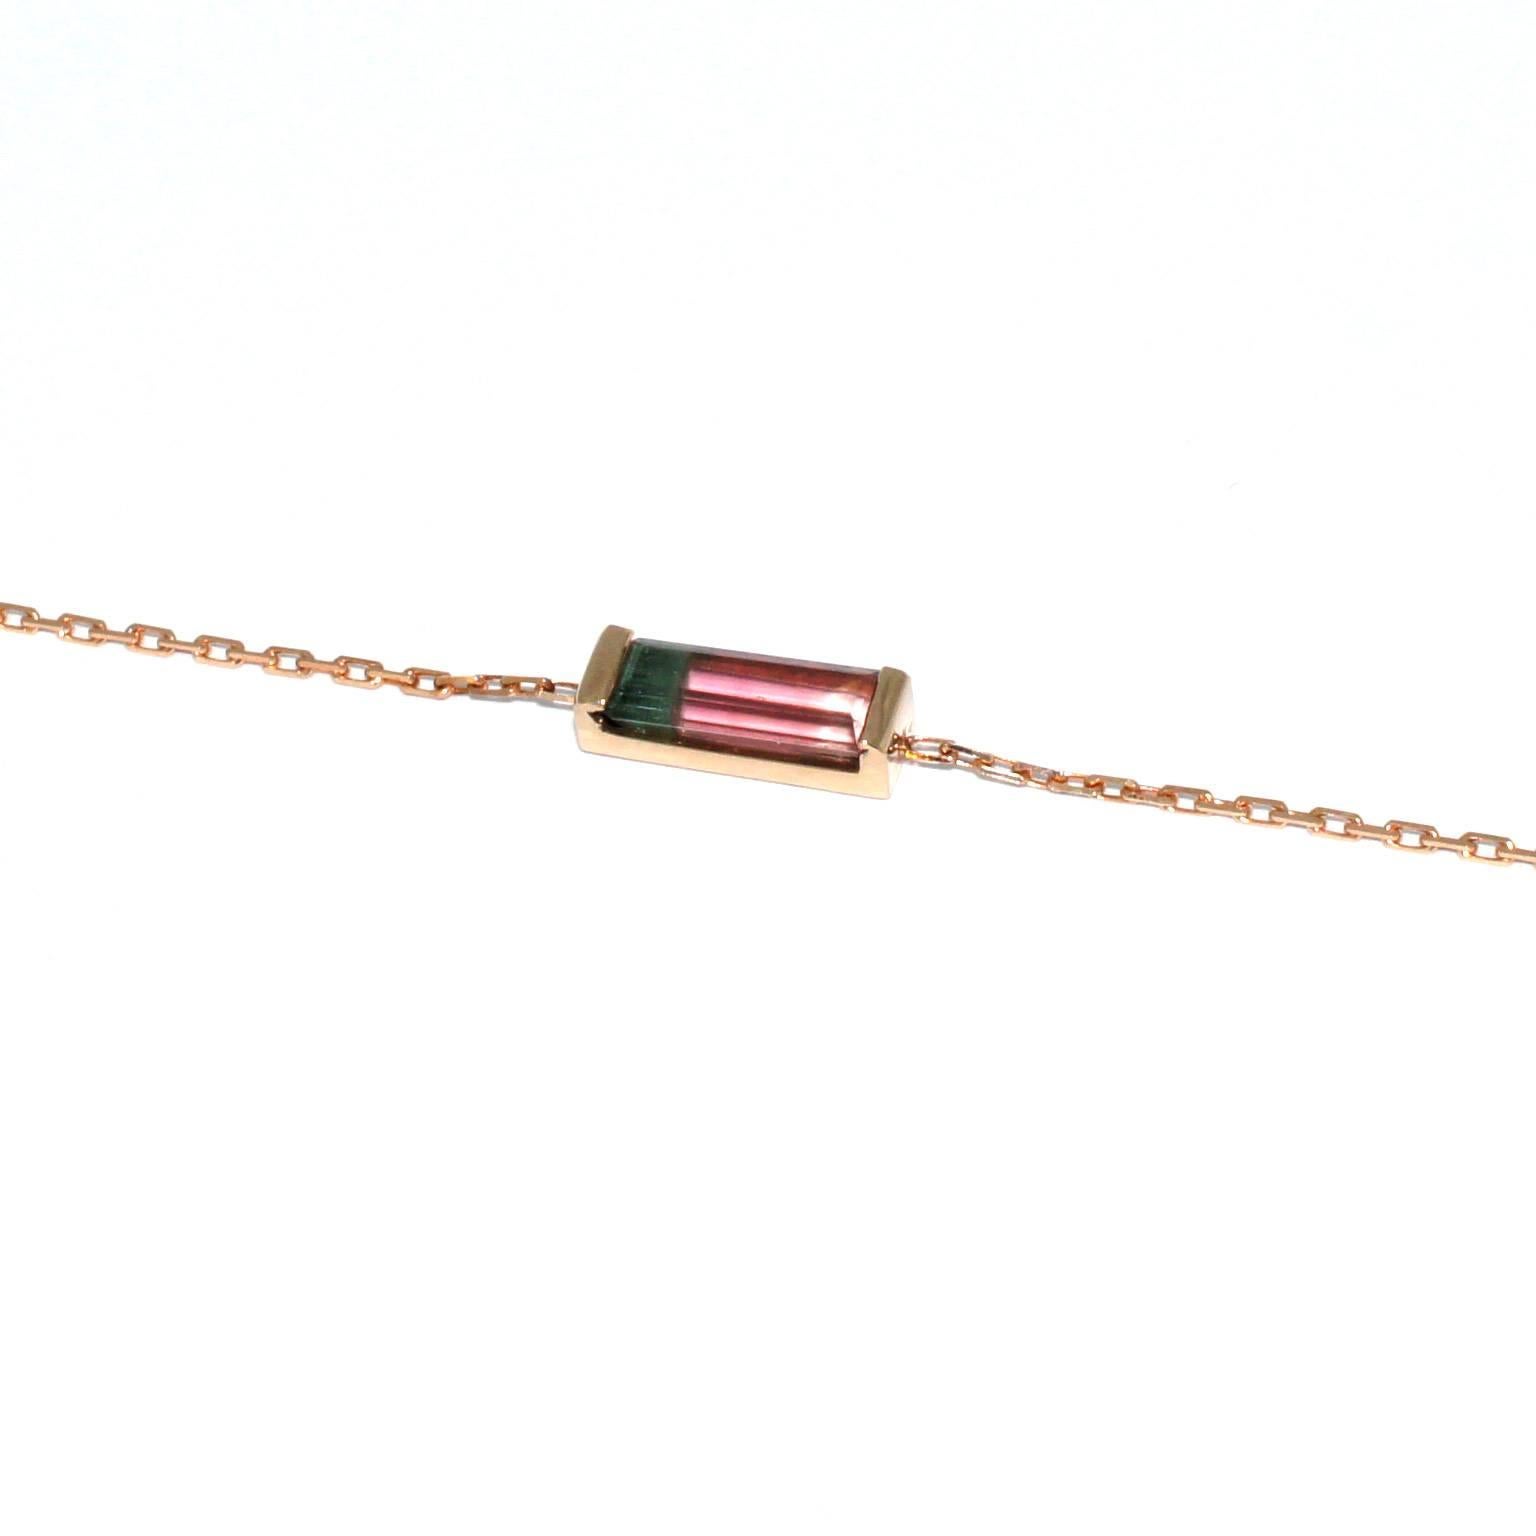 This simple and timeless chain bracelet is handmade in Sydney in 18k rose gold and set with a pretty baguette-cut bi-colour 1.76ct tourmaline. Easy to wear and versatile. 

Chain bracelet with a boltring clasp.
Overall length: 17.8cm/7 inches (can